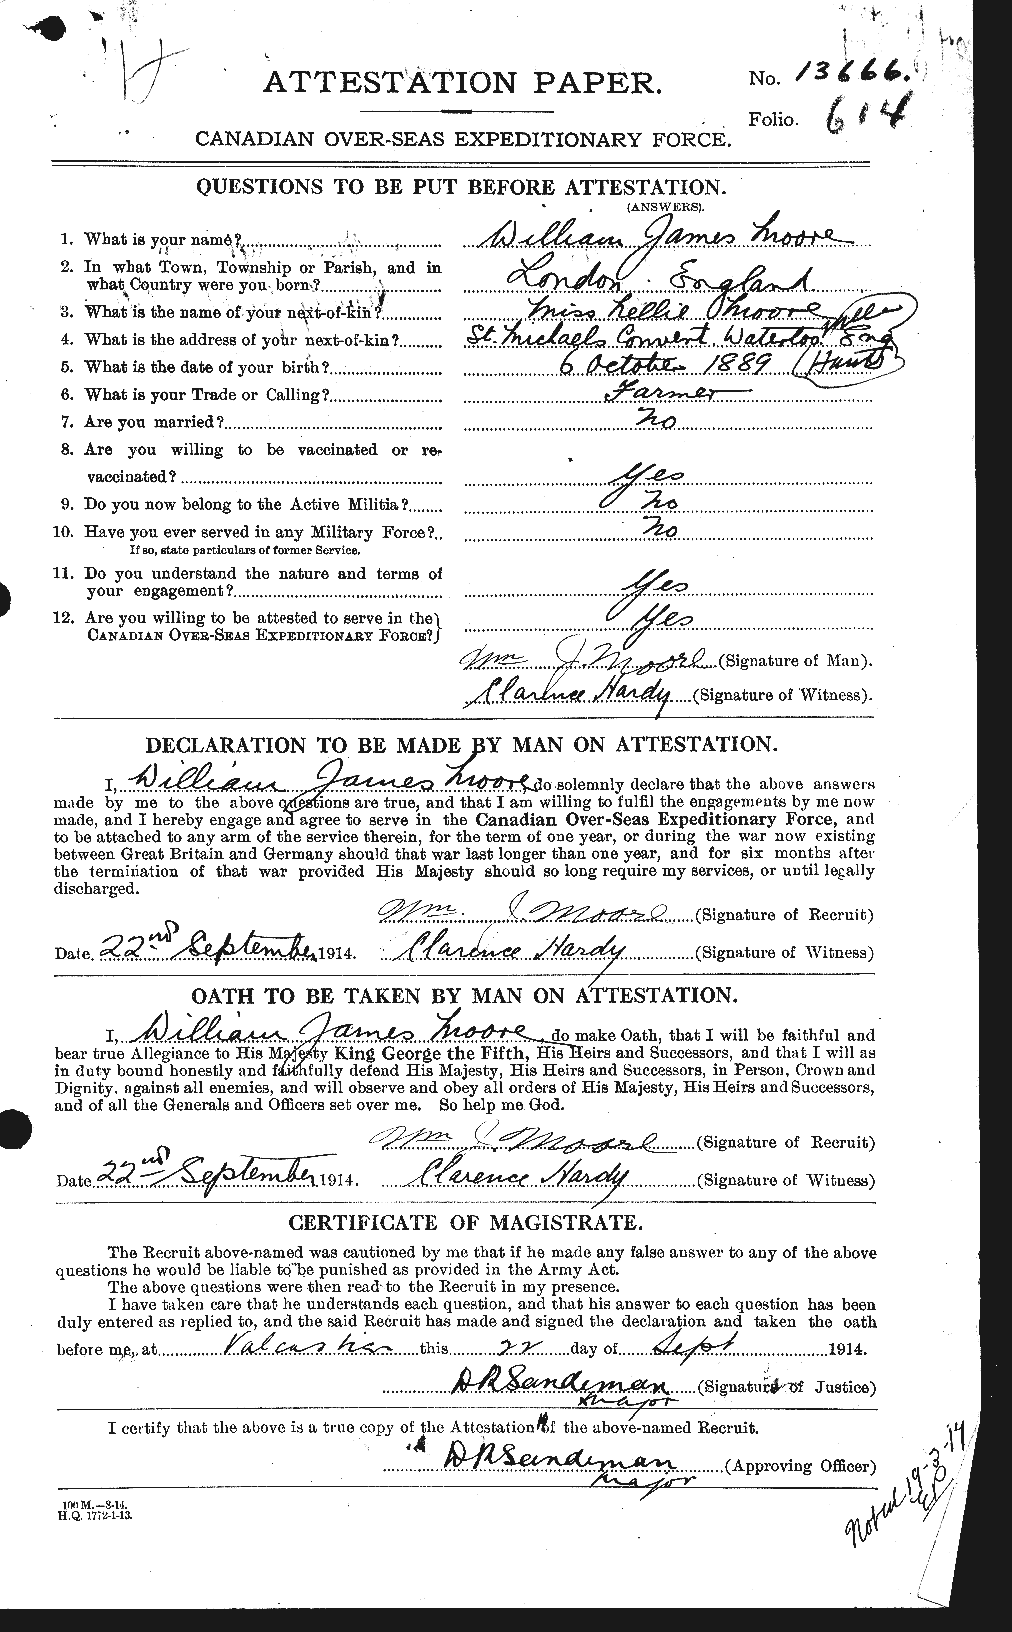 Personnel Records of the First World War - CEF 505831a